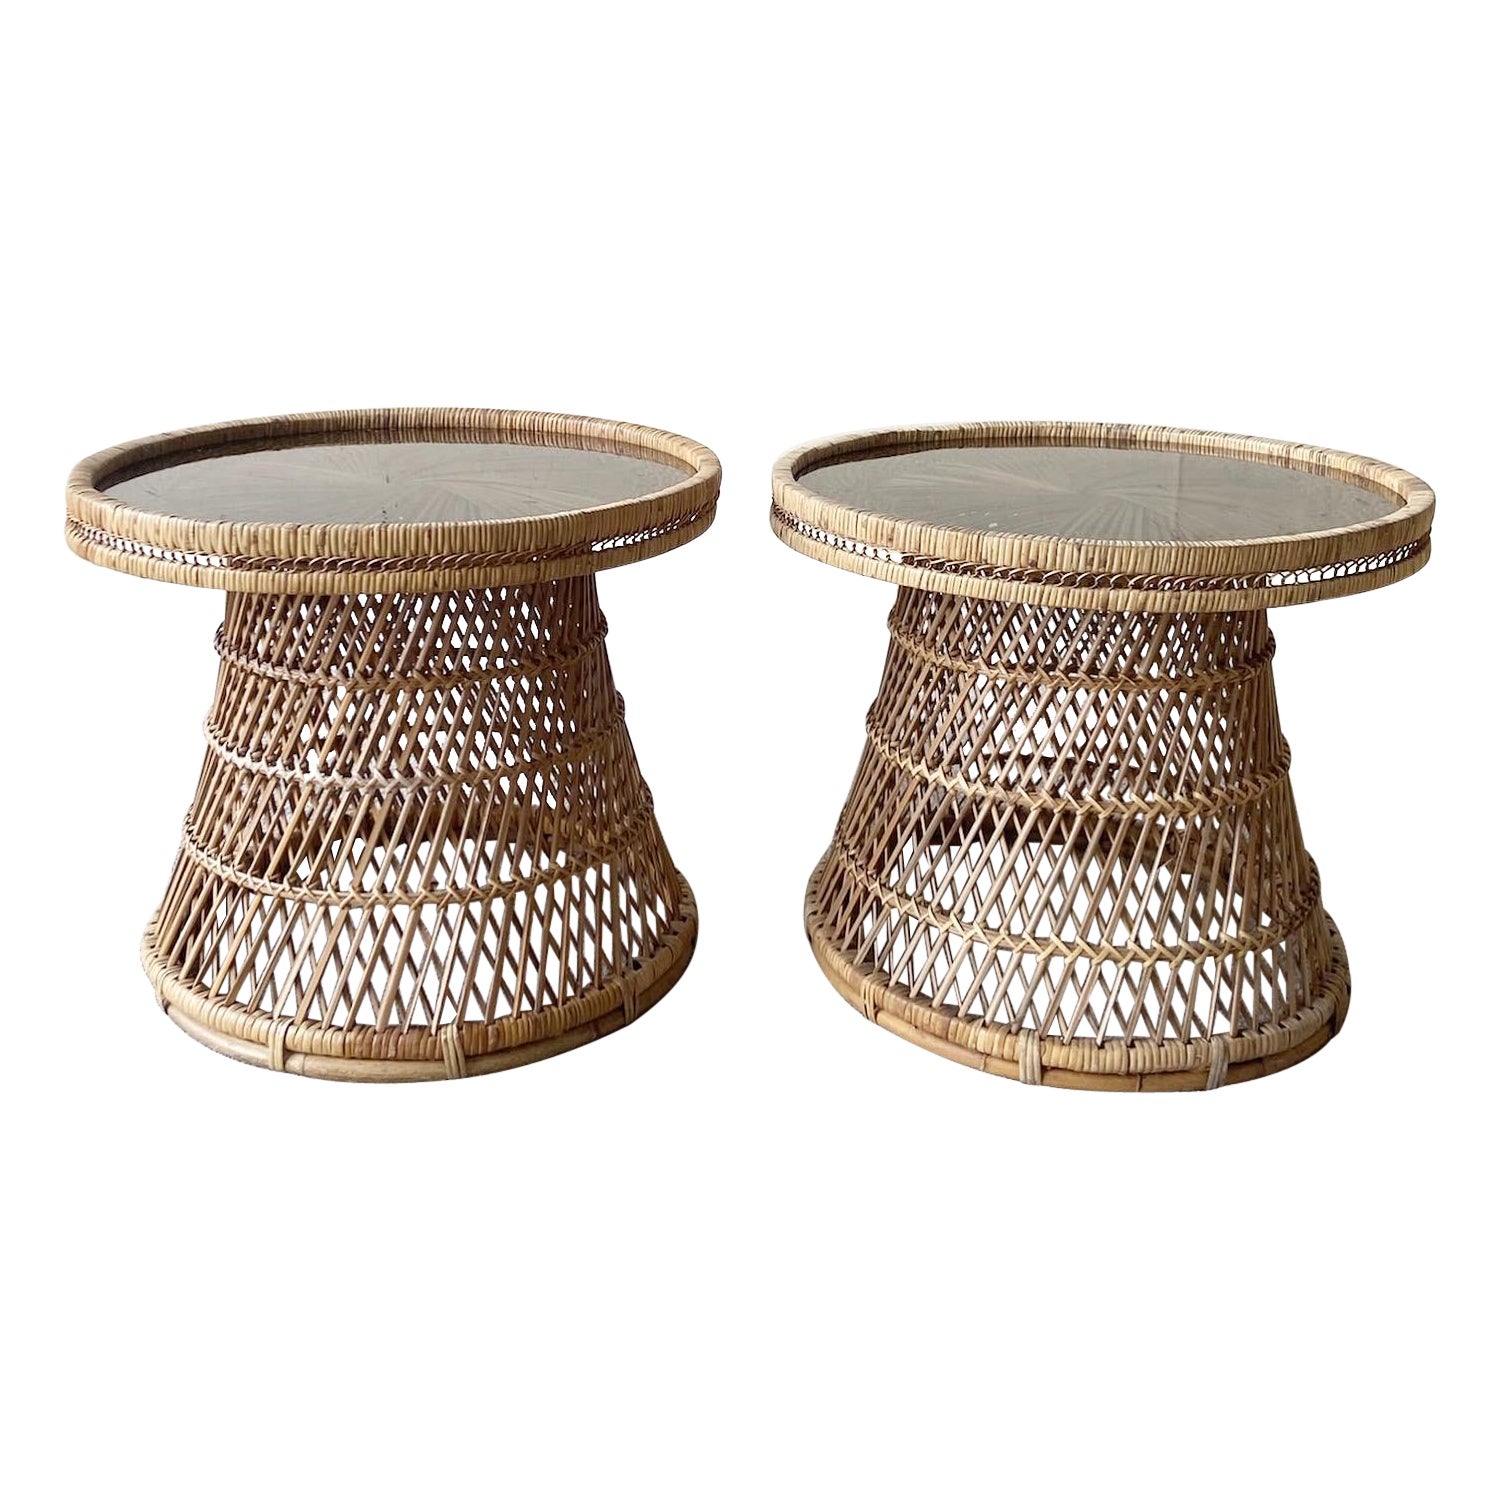 1980s Boho Chic Buri Rattan Smoked Glass Top Hour Glass Side Tables, a Pair